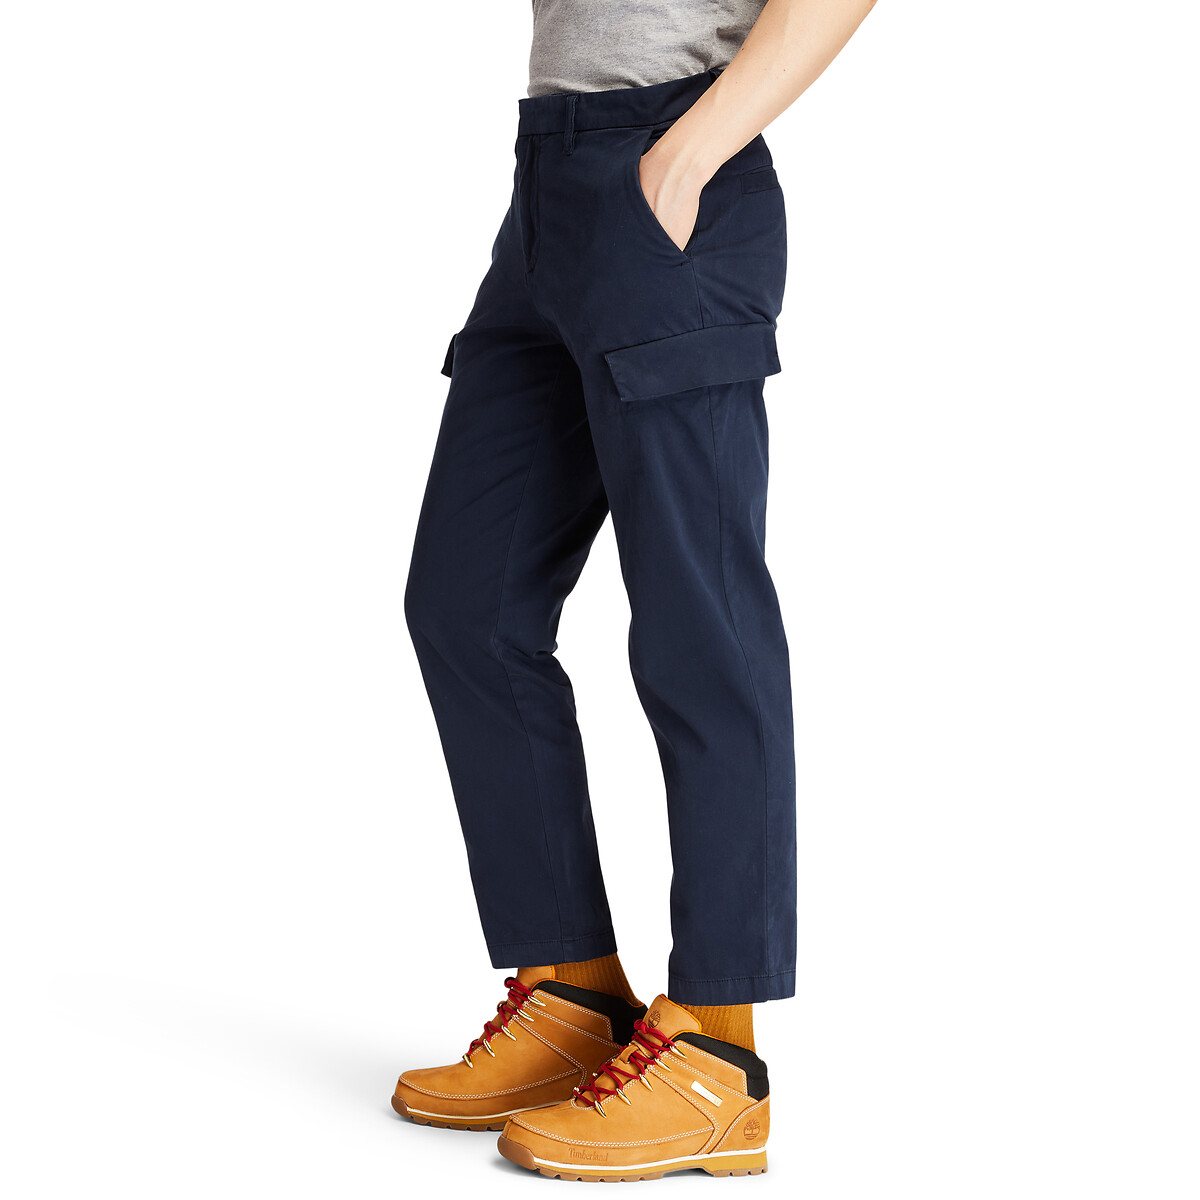 Chino Trousers for Men  Mens Chinos  Timberland UK  Chino trousers Mens  chinos Slim fit chinos